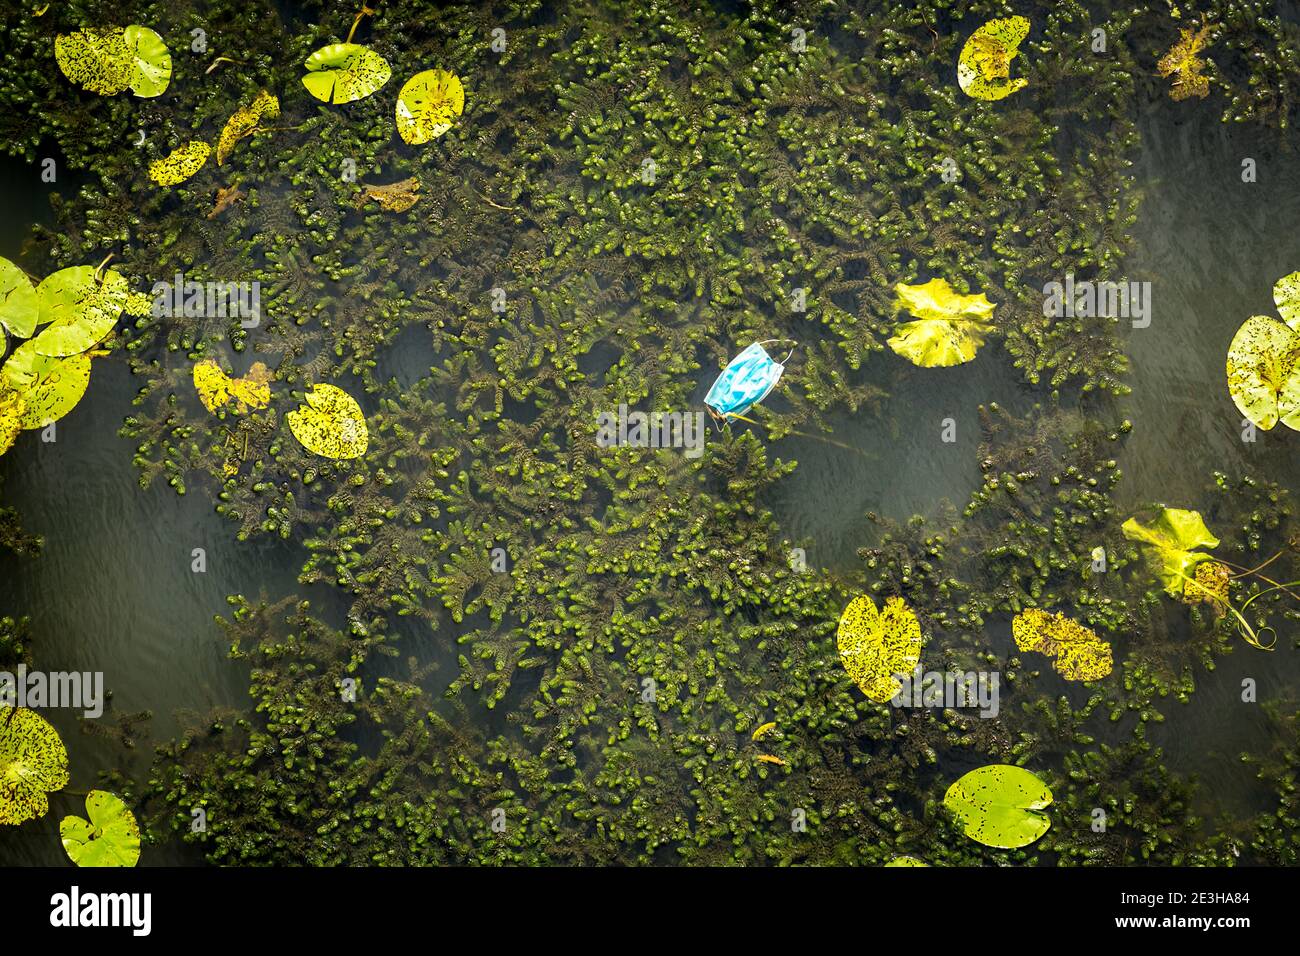 Surgical face mask floating in a river next to becoming part of nature during 2020 Covid19 pandemic Stock Photo